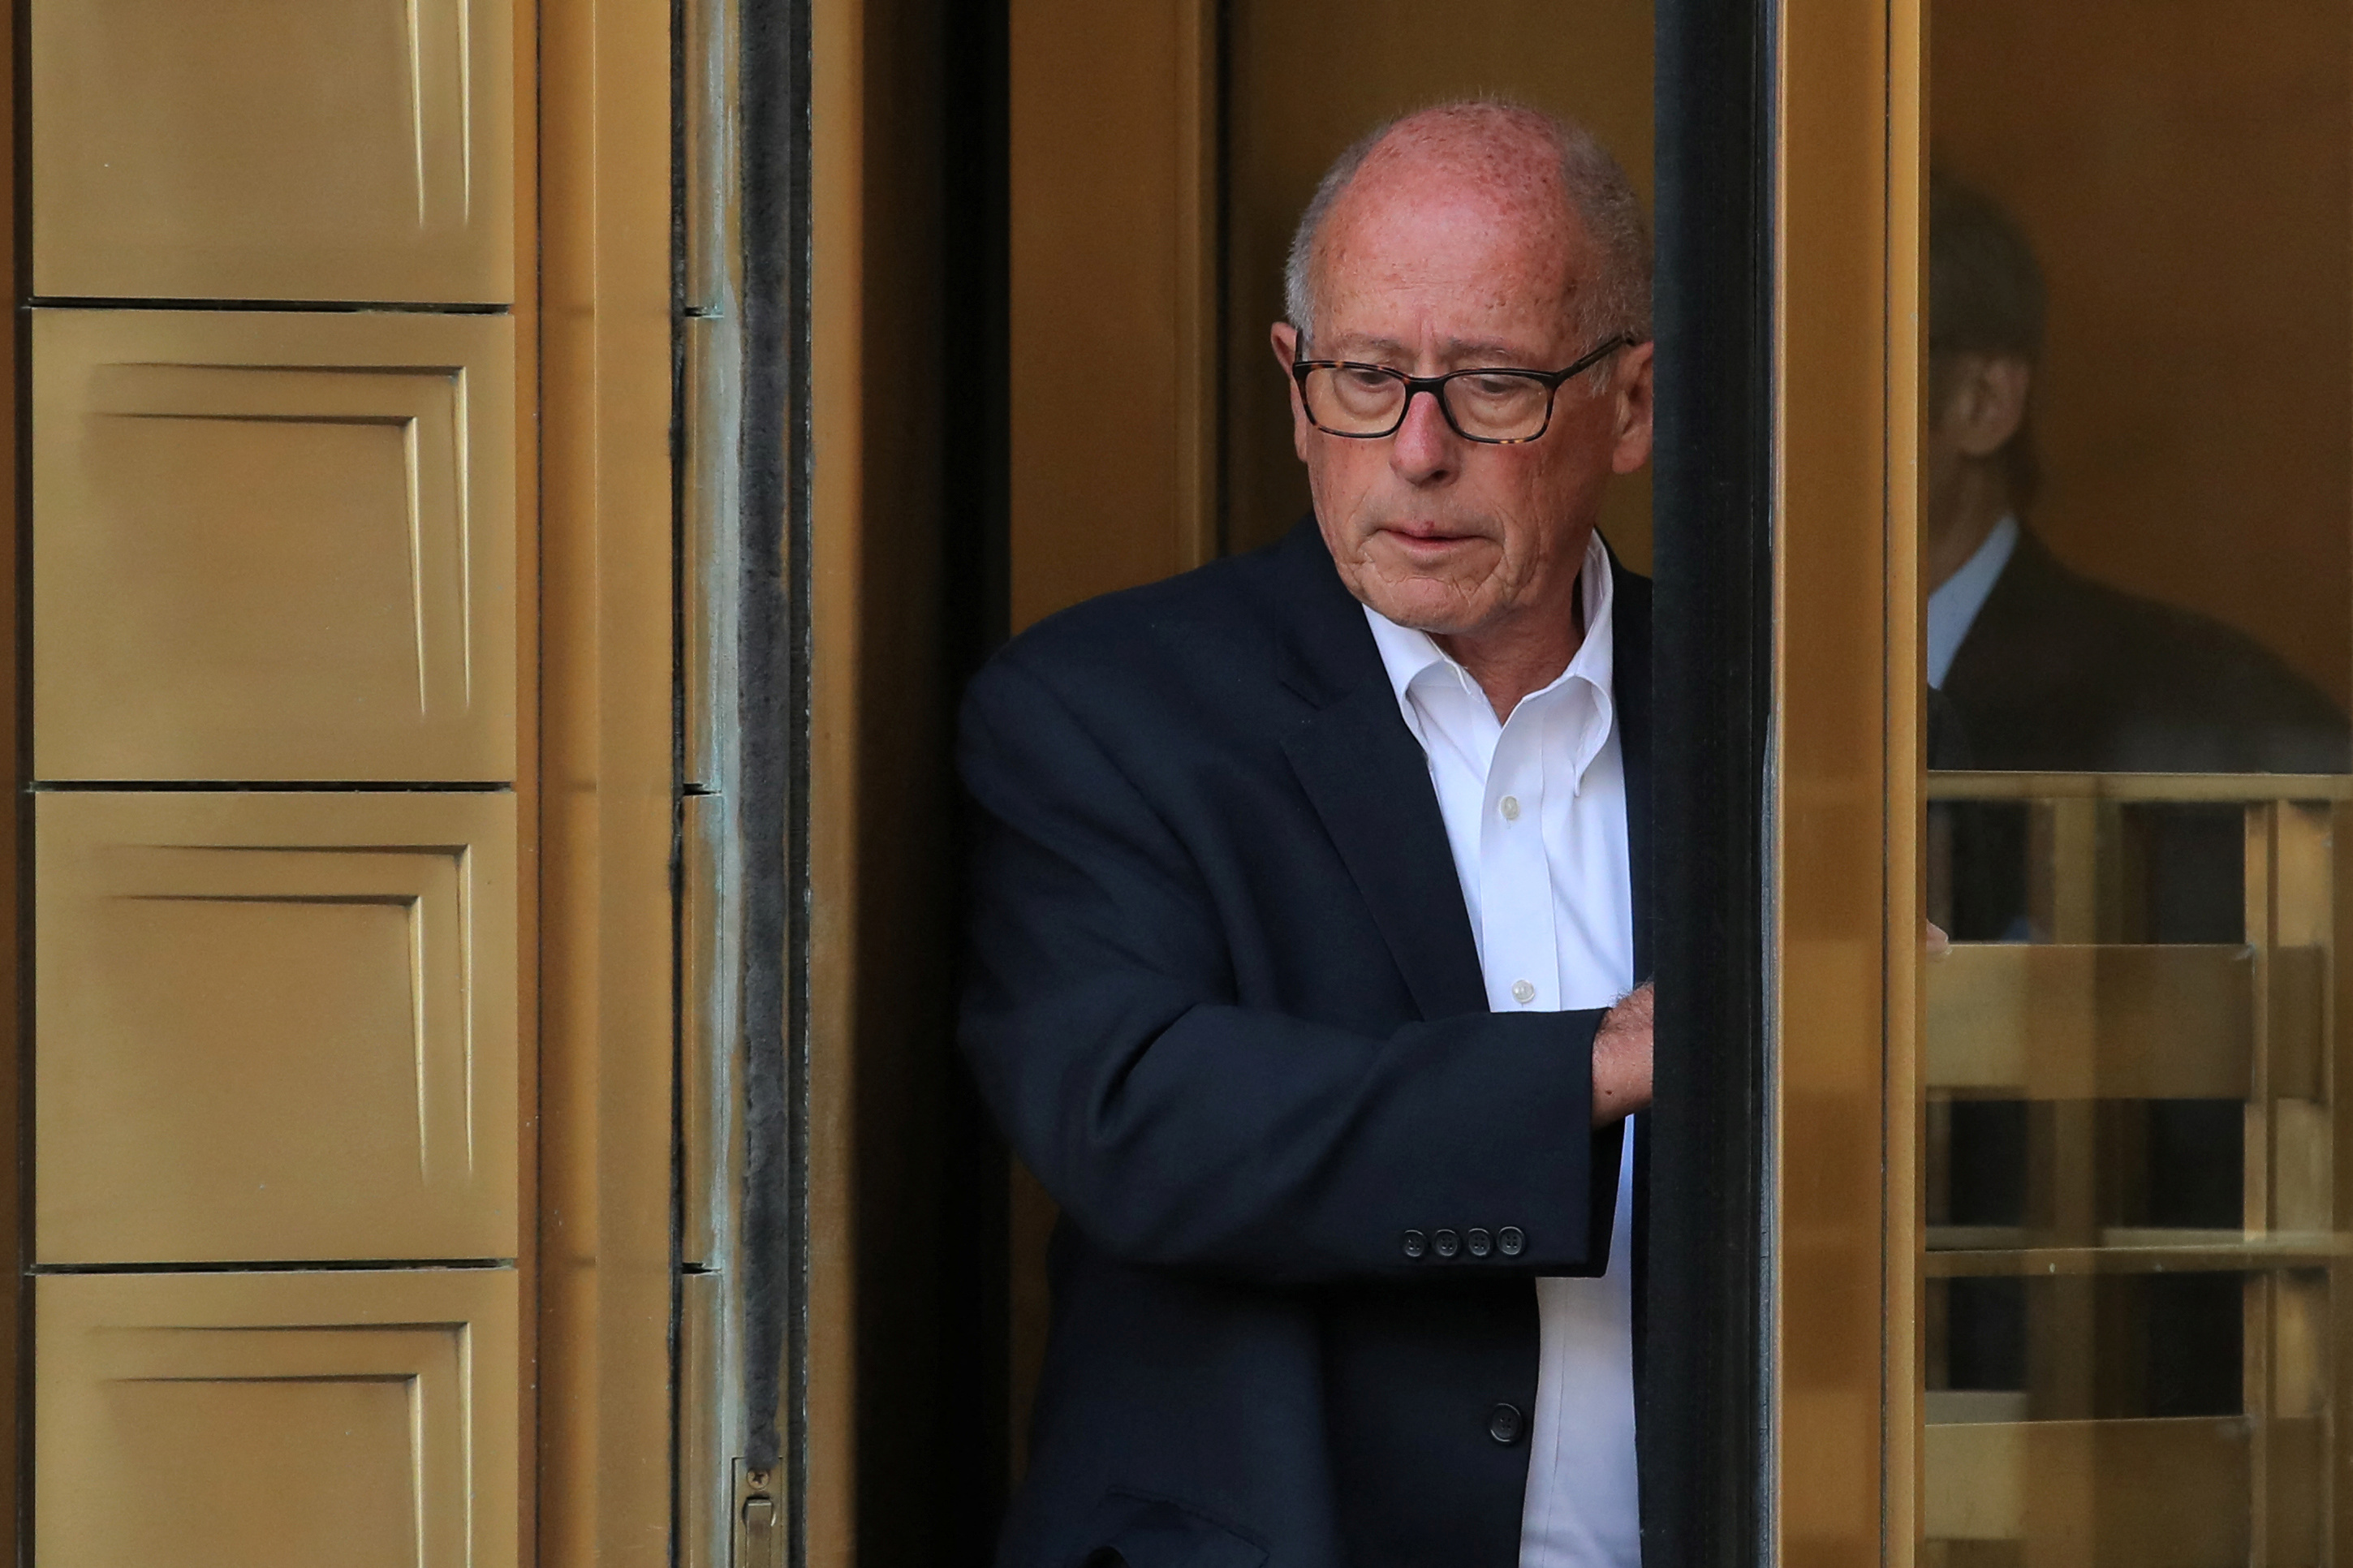 Laurence Doud III, former CEO of Rochester Drug Co-Operative, exits the Manhattan Federal Courthouse in New York